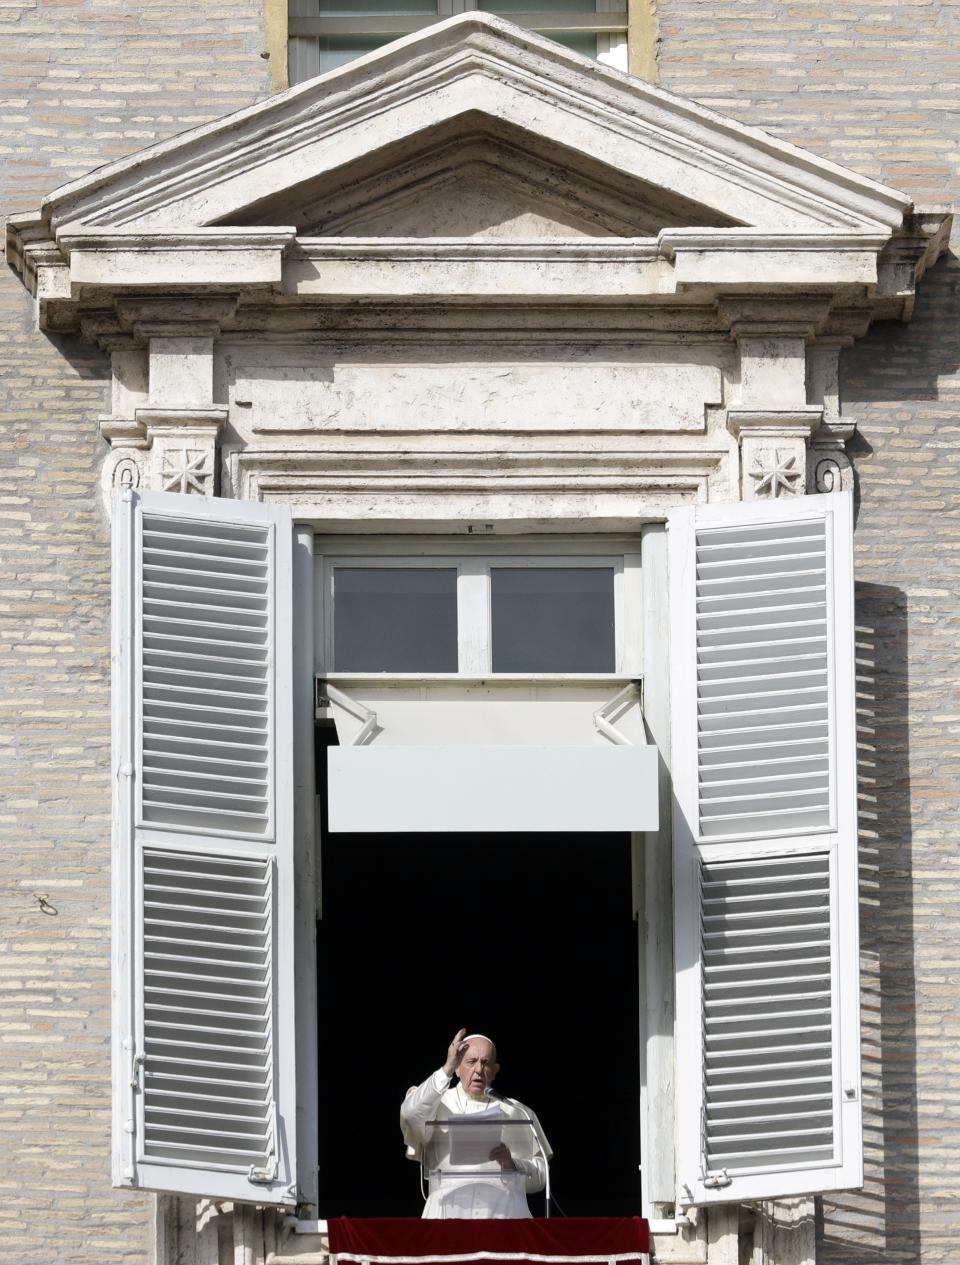 Pope Francis delivers his blessing during his Angelus prayer from his studio window overlooking St. Peter's Square, at the Vatican, Sunday, Nov. 10, 2019. (AP Photo/Gregorio Borgia)